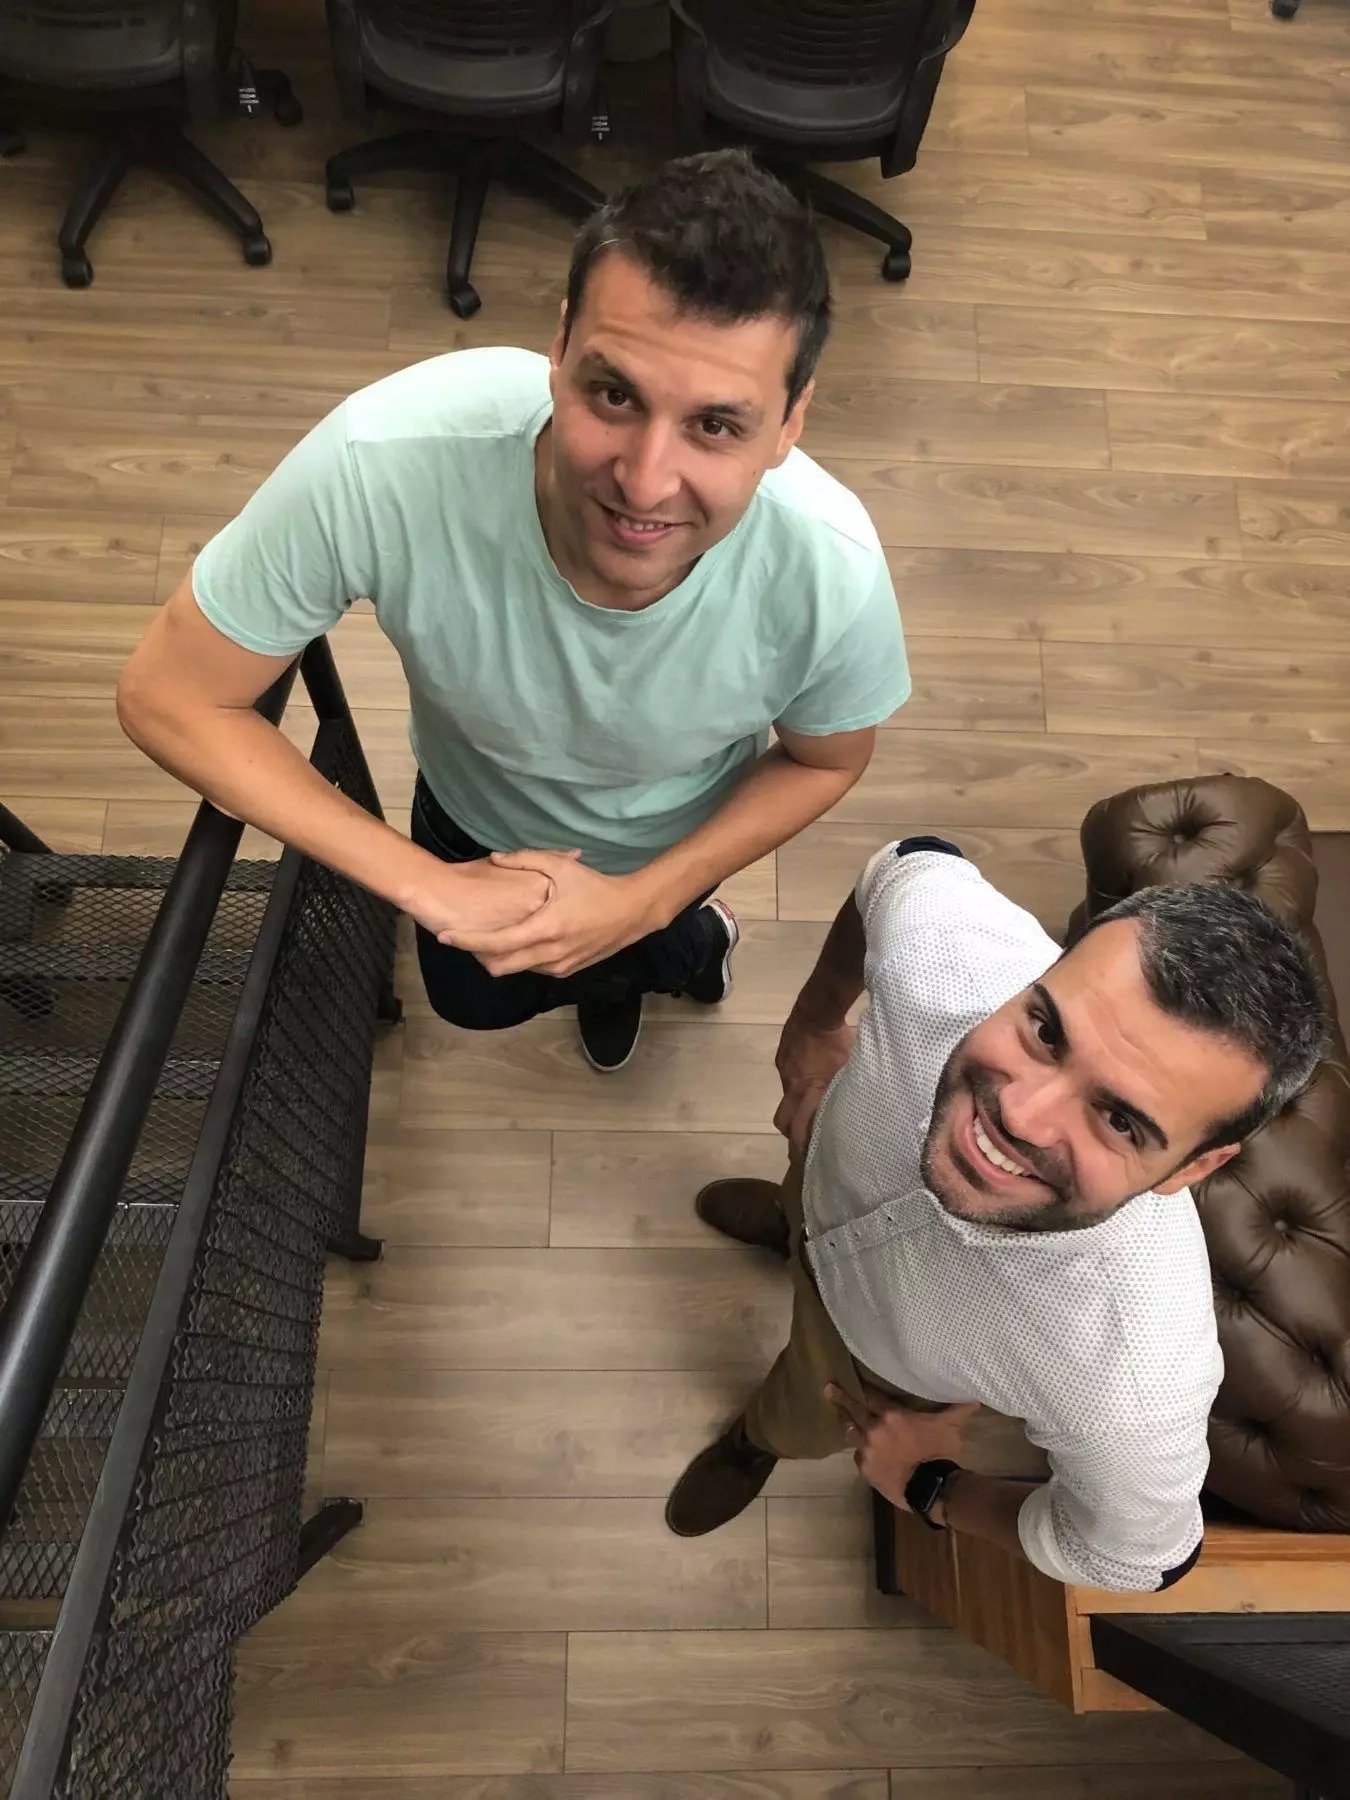 Peter (left) and Federico (right), founder and partner of YourColumbia